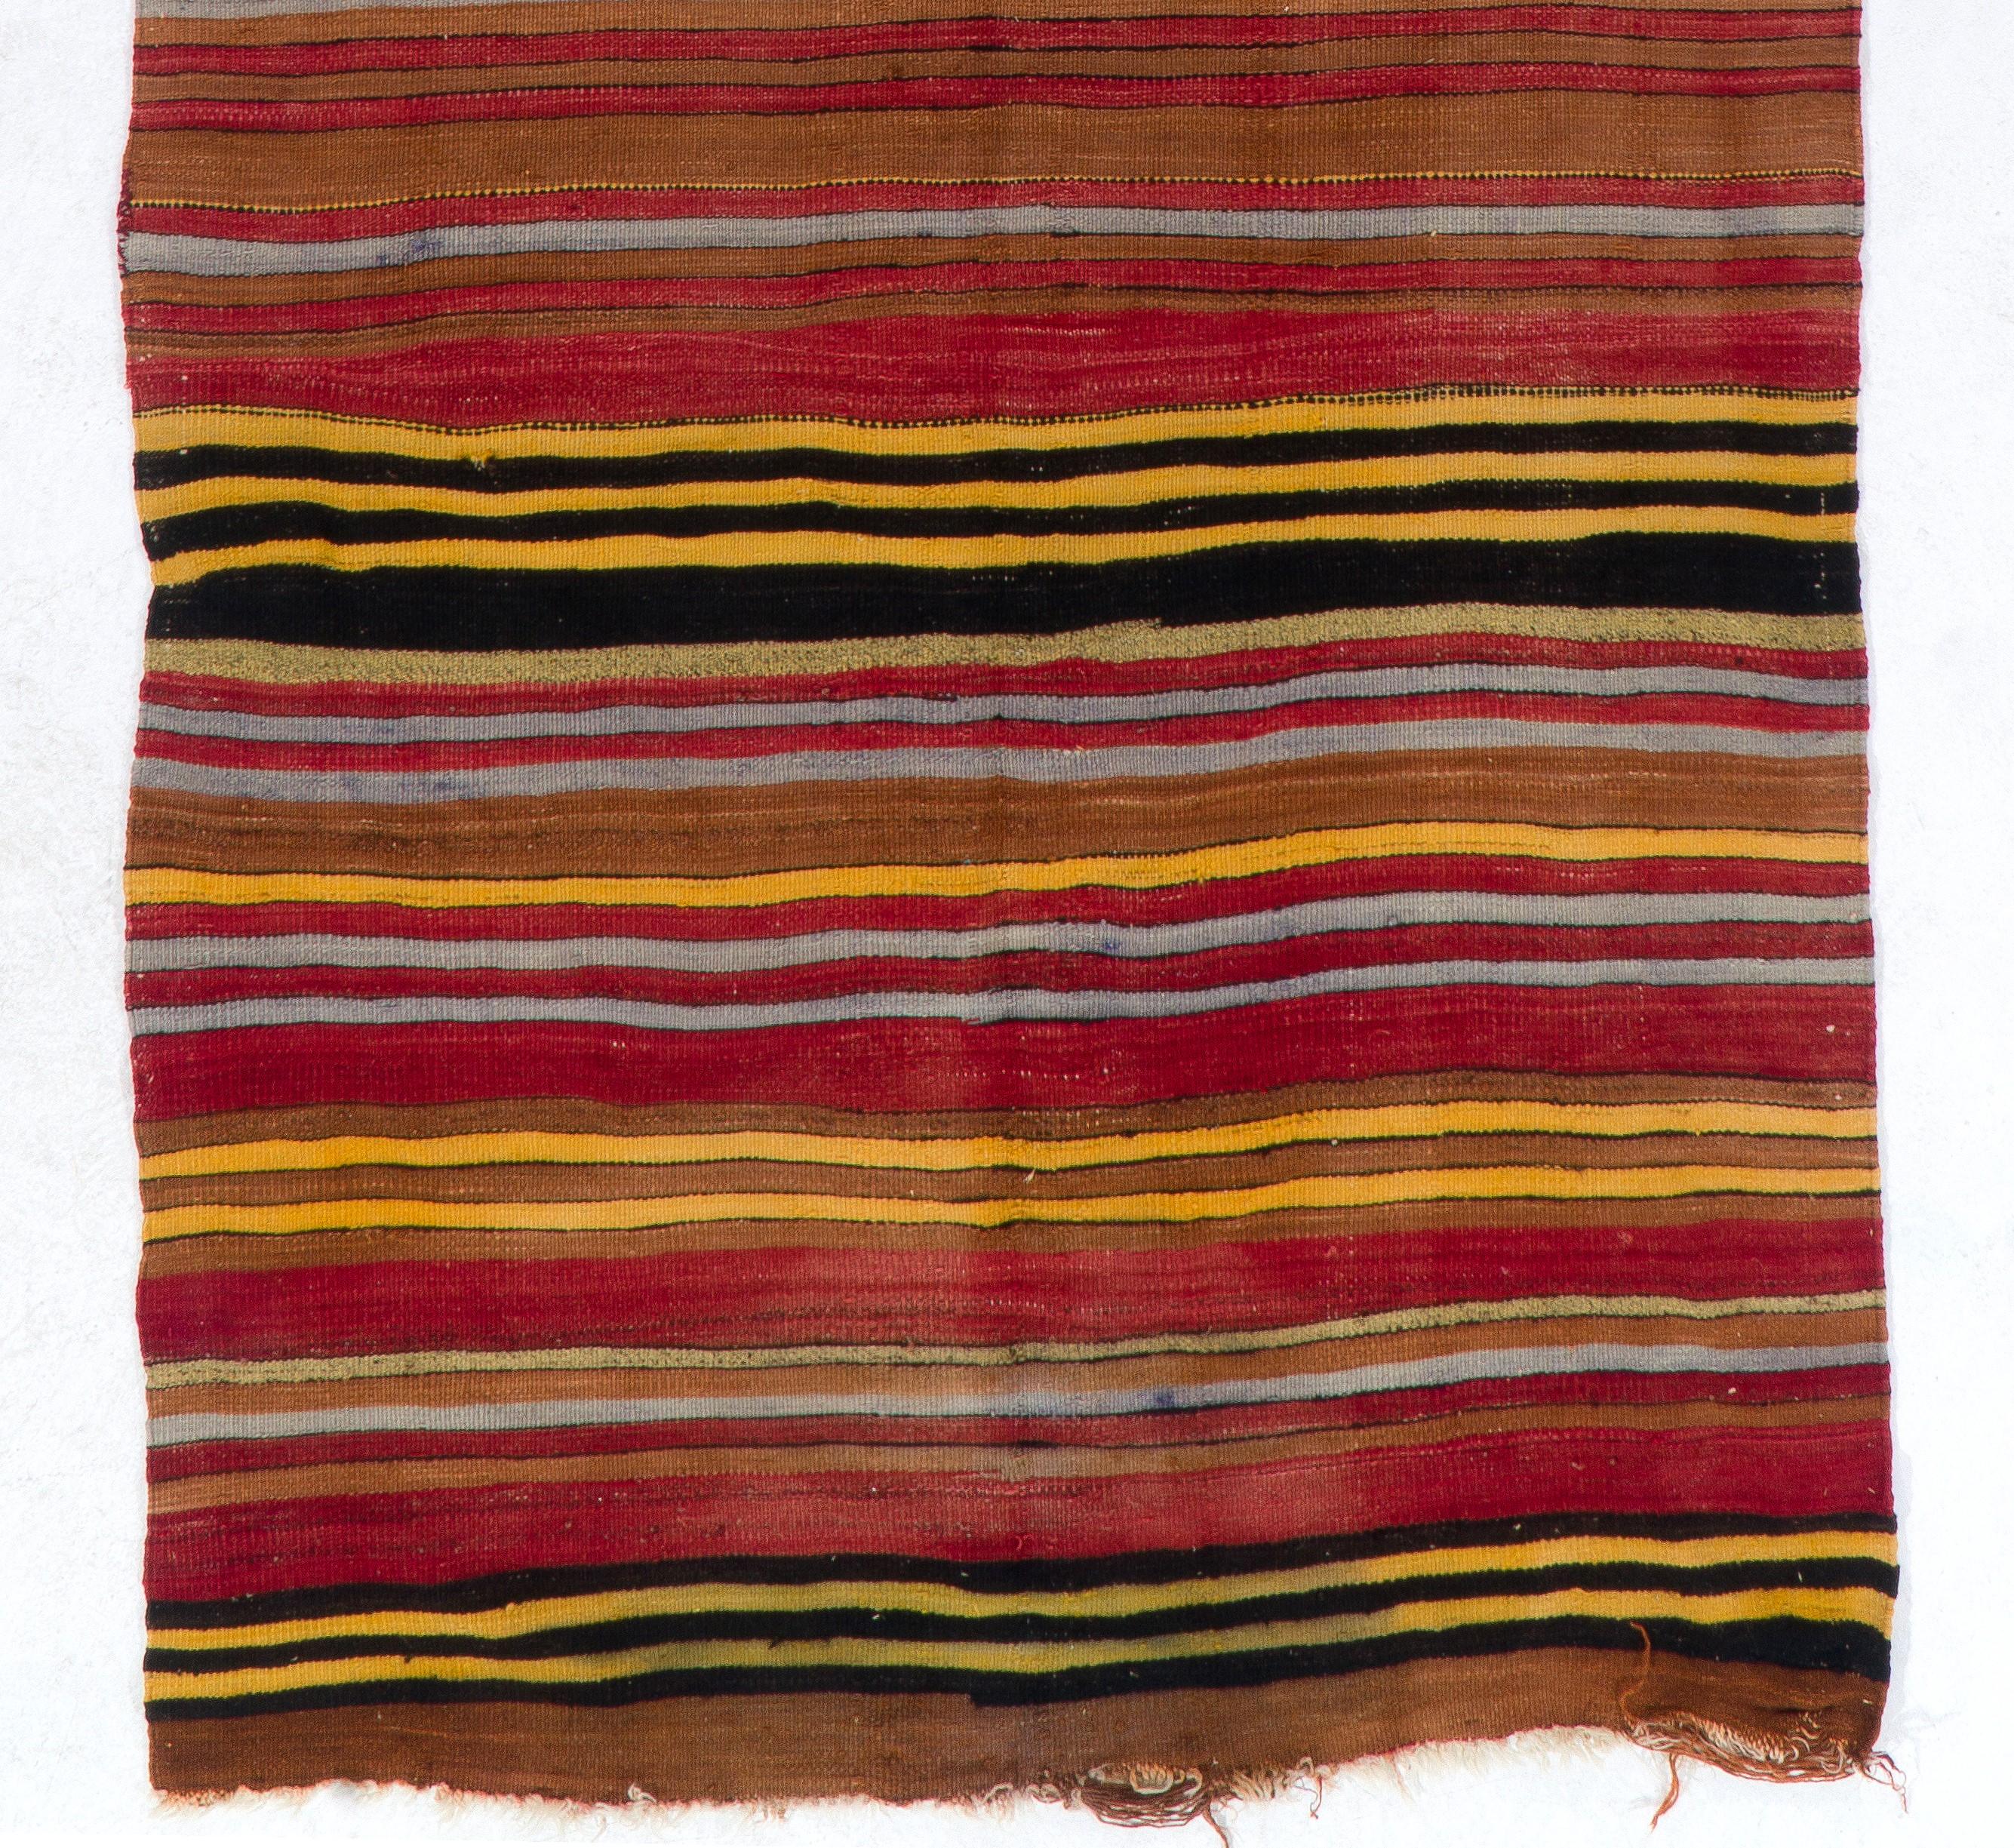 4.6x11.2 Ft Colorful Vintage Striped Handwoven Turkish Kilim 'Flat Weave' In Good Condition For Sale In Philadelphia, PA